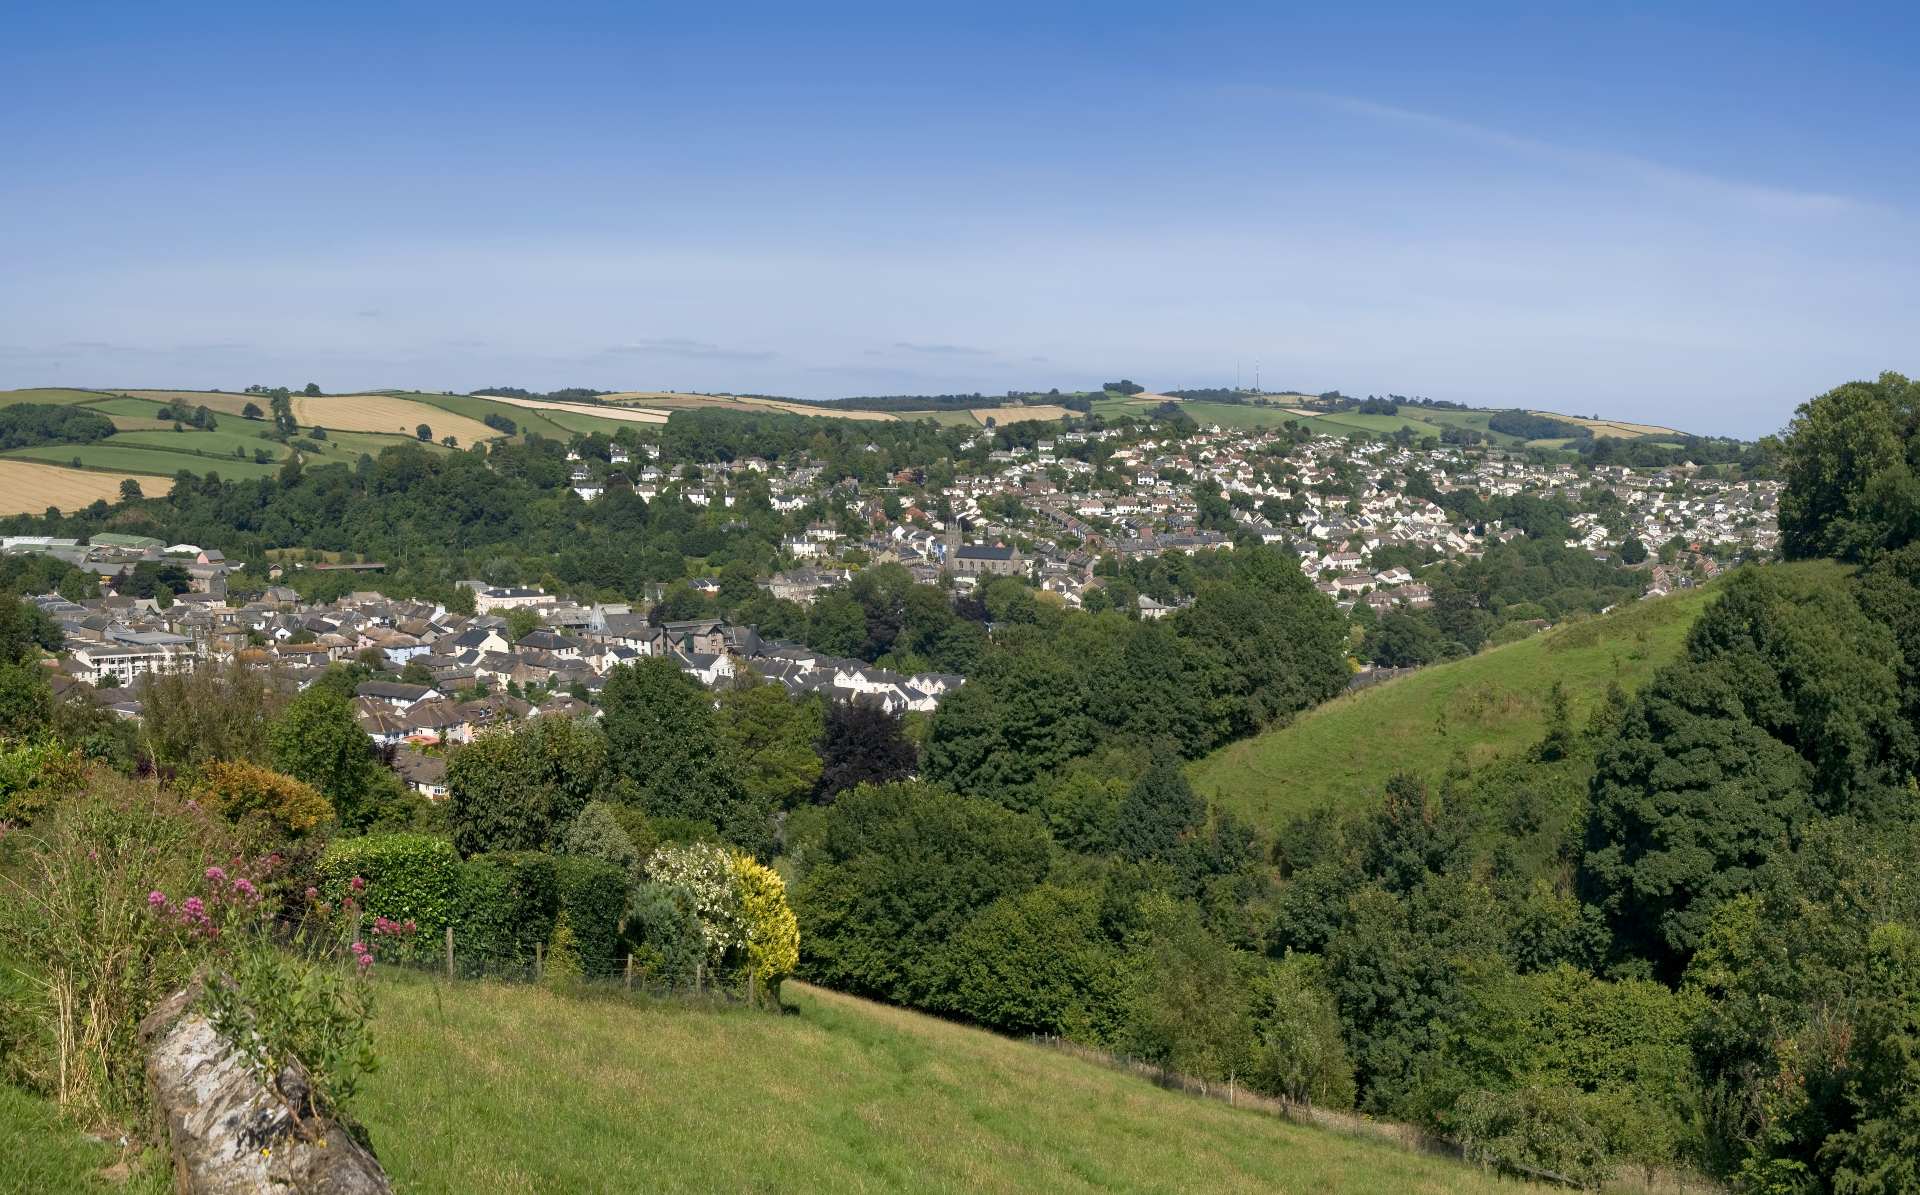 A picturesque town nestled within a countryside valley of the South Hams